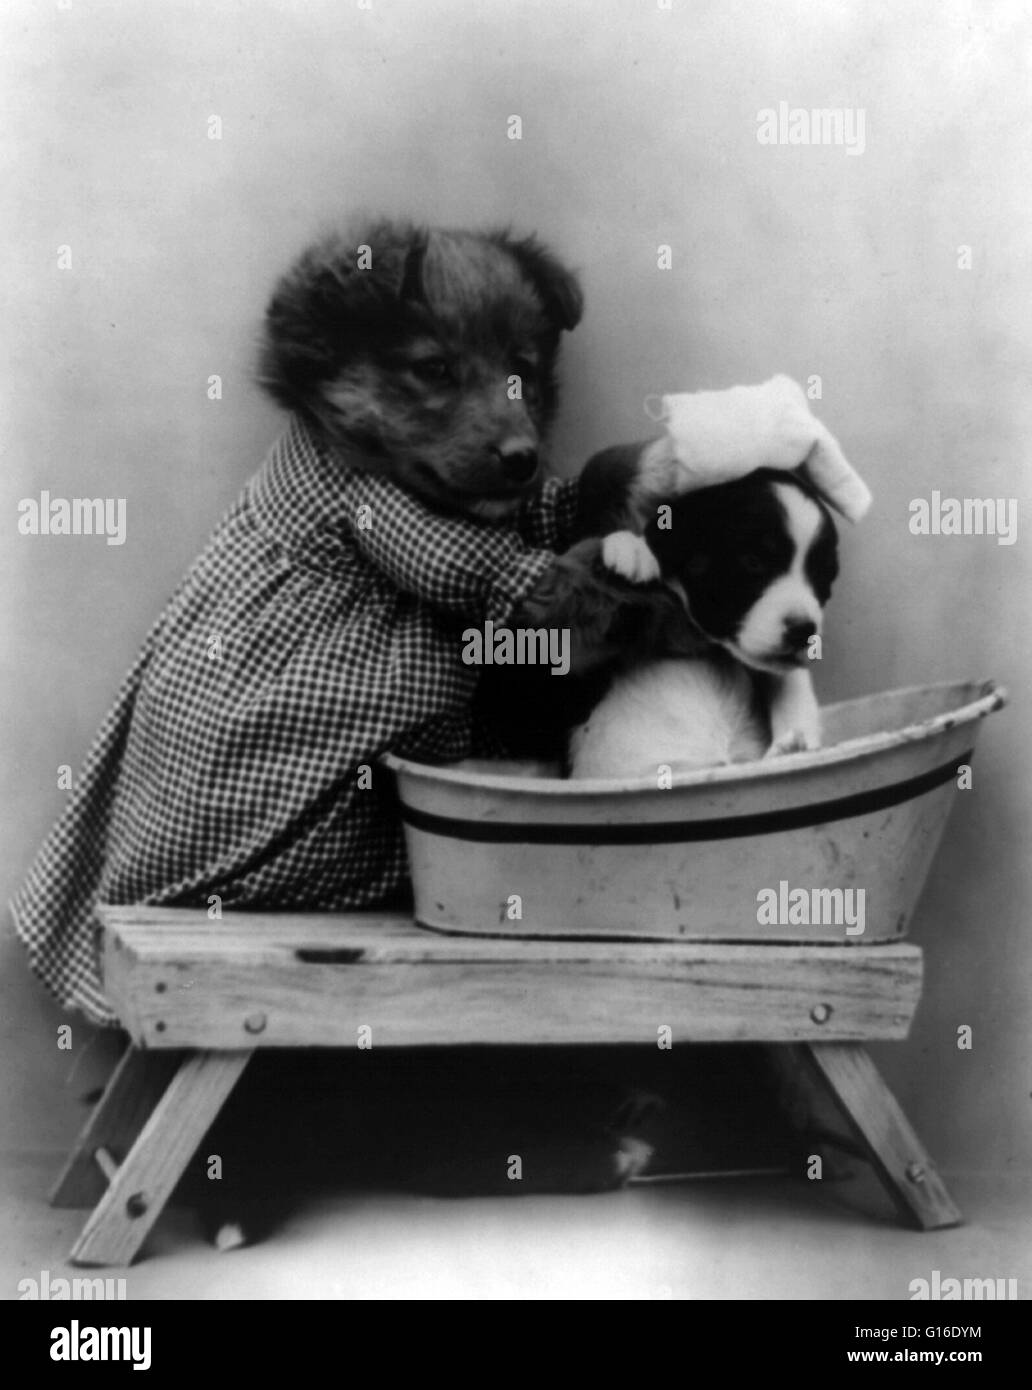 Entitled: 'The bath' shows dog dressed as human appearing to give another dog a bath in tub. Harry Whittier Frees (1879 - 1953) was an American photographer who photographed live animals dressed and posed in human situations with props. His animal photos Stock Photo